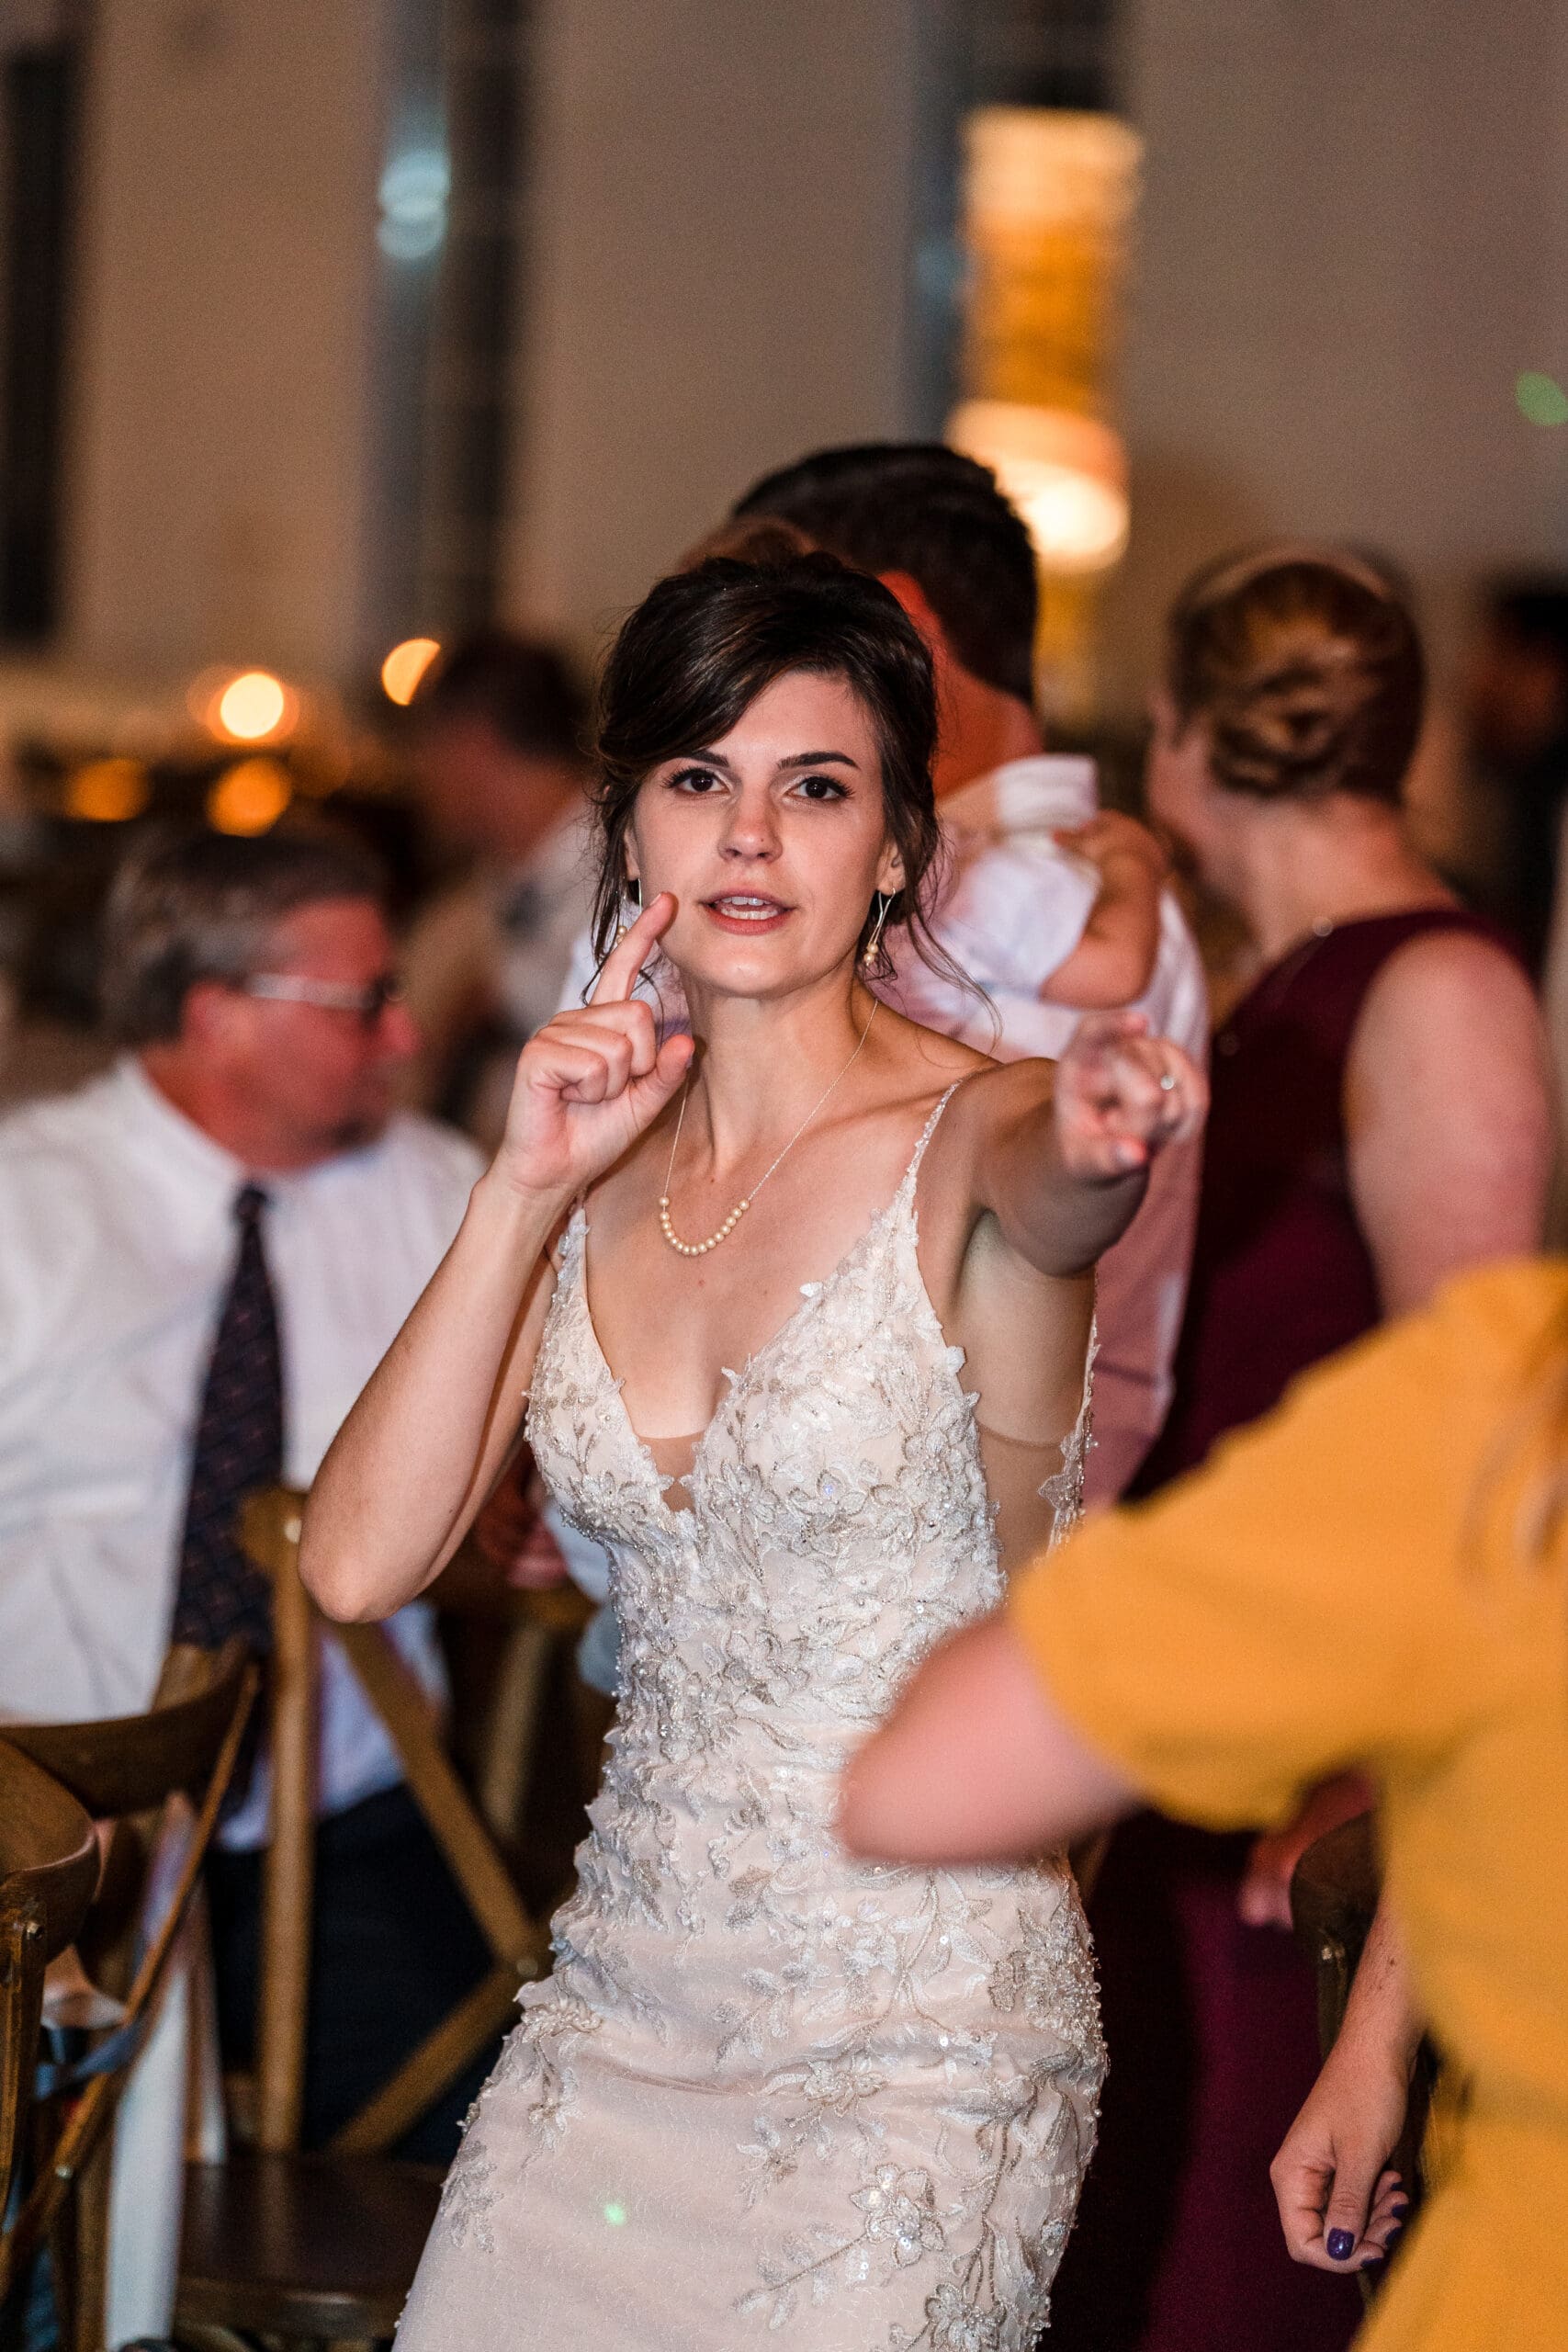 Bethany pointing at the camera during a dance move at the Sterling Event Venue Reception Center.